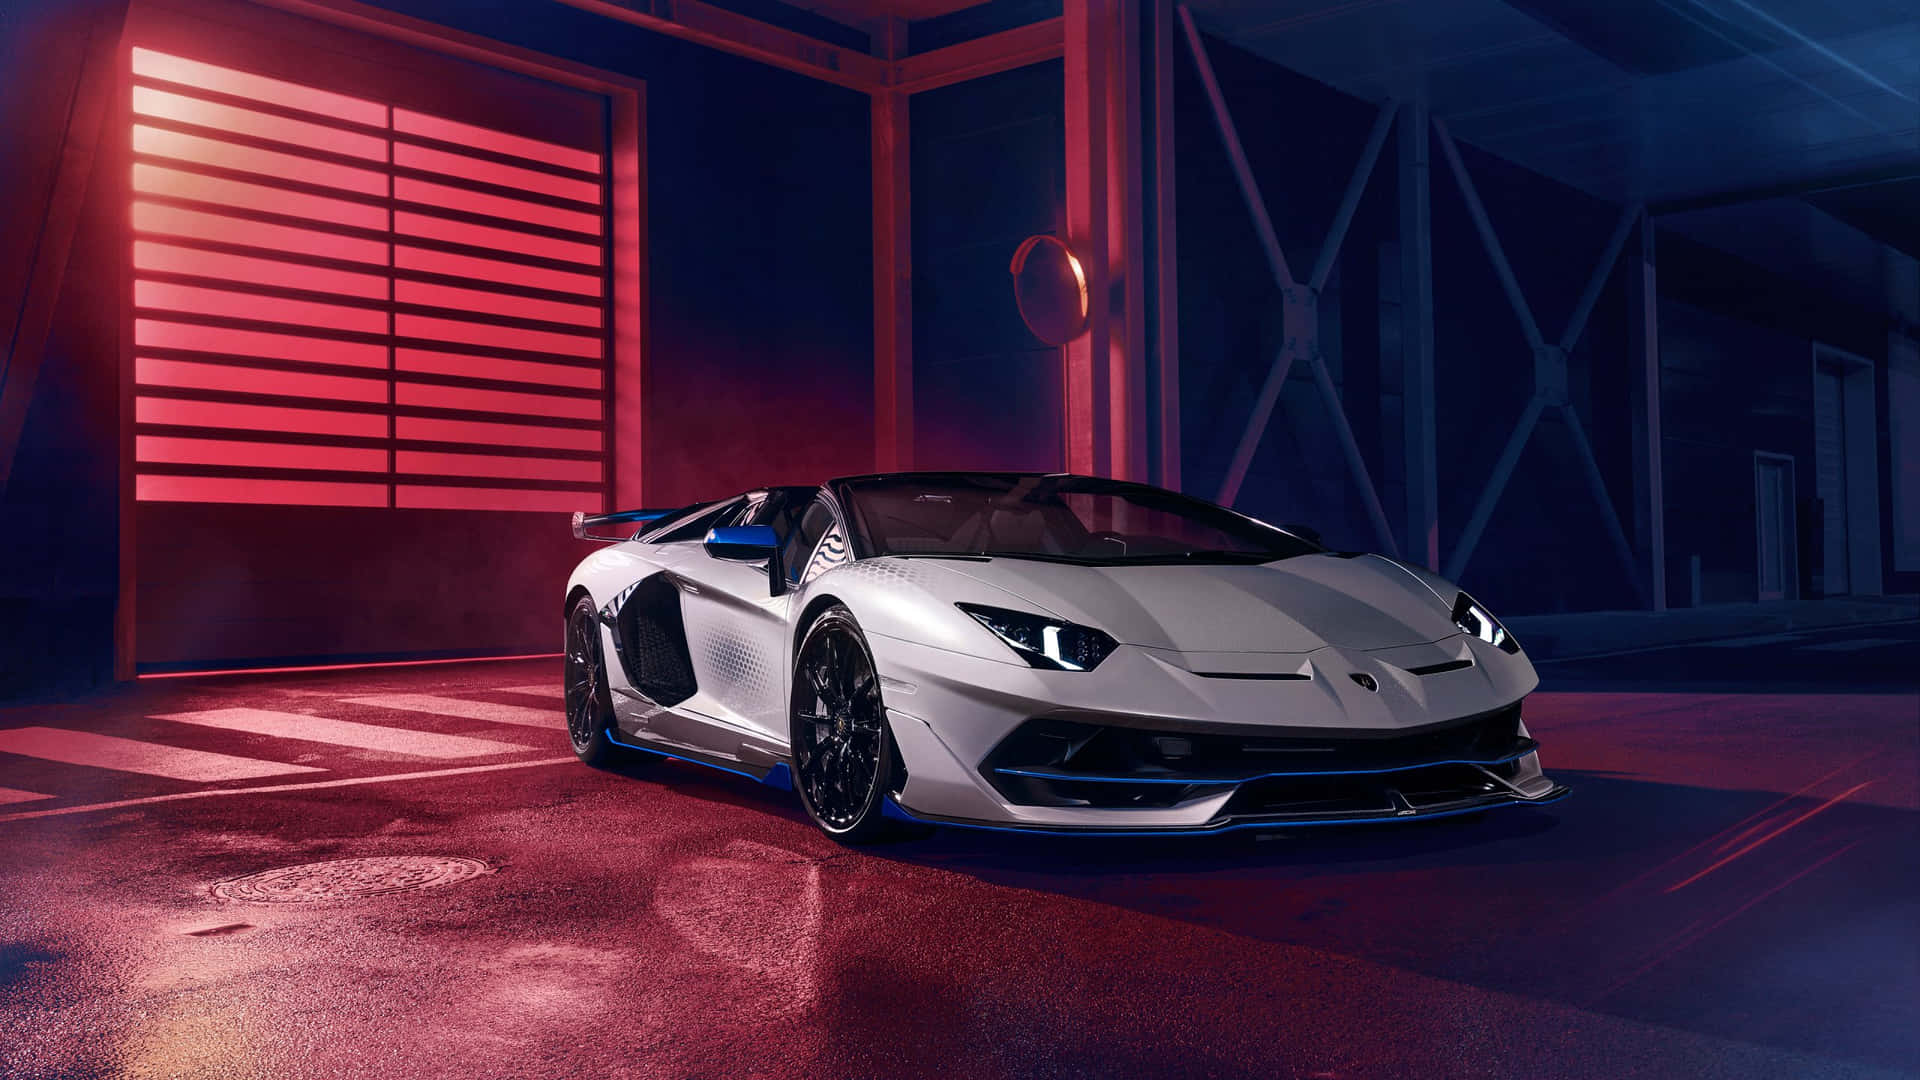 Make Every Moment Count With a Lamborghini